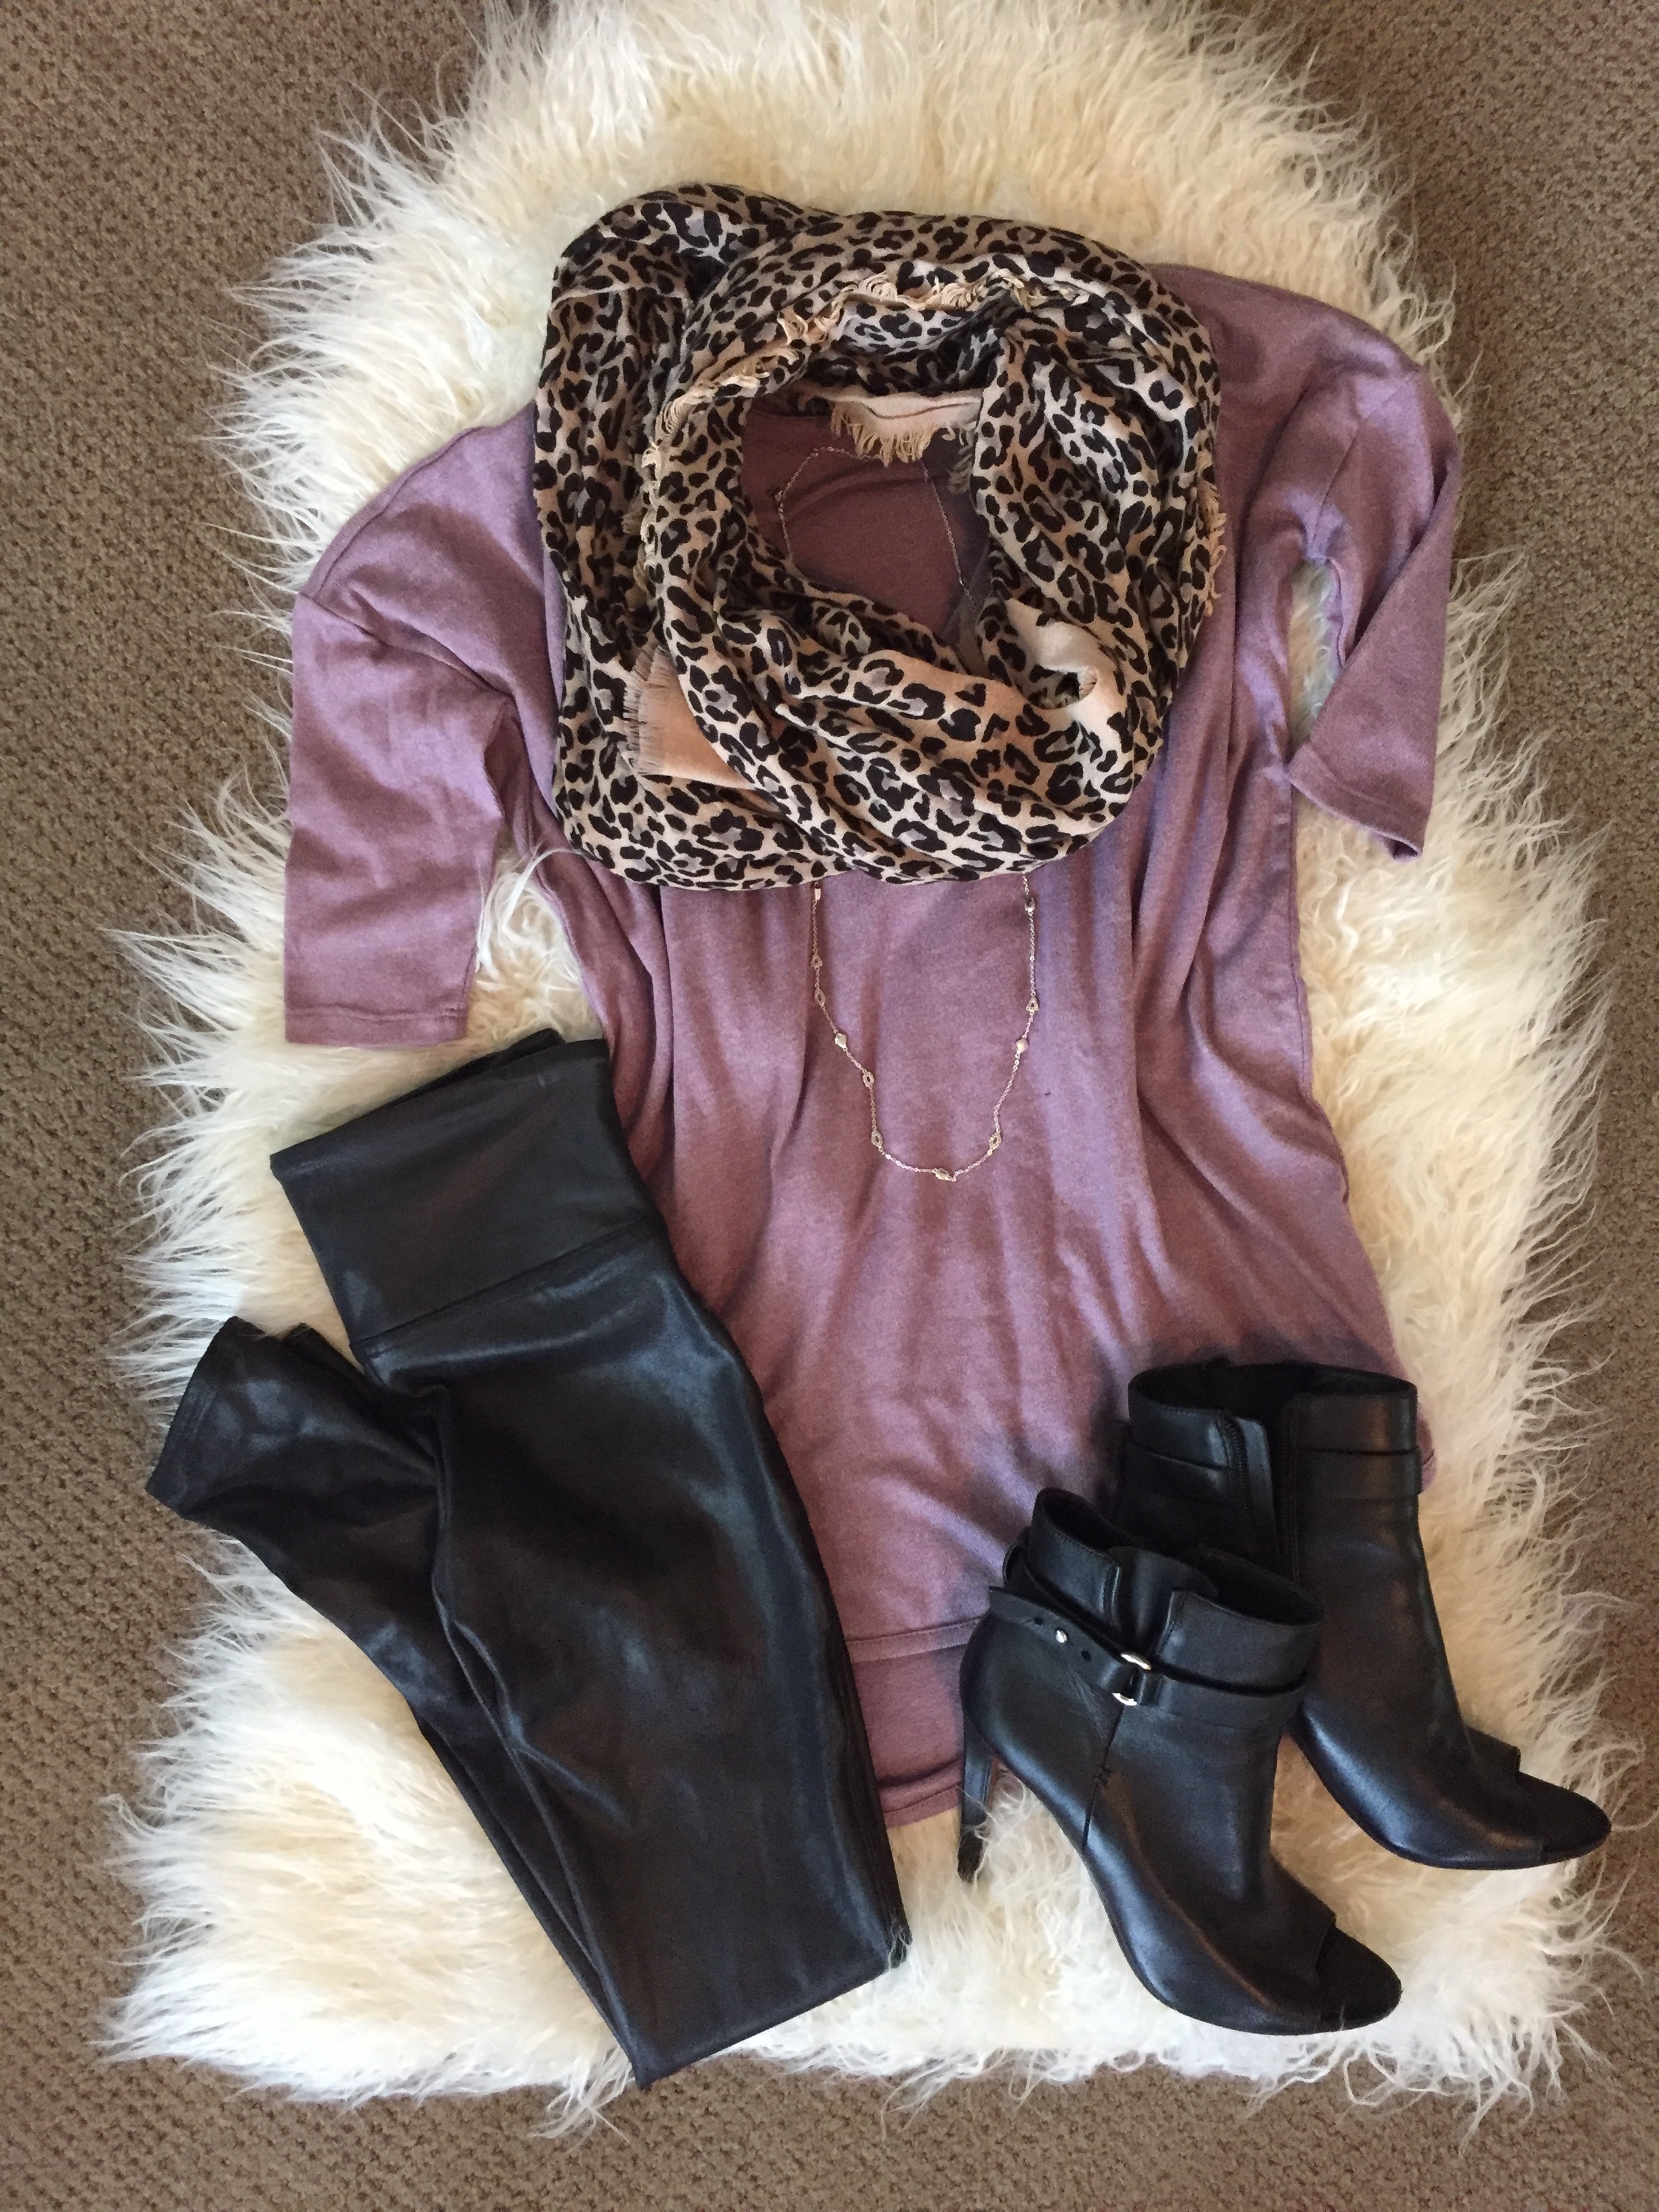 mauve, Express, Tshirt, slouchy, casual, dressy, spanx, faux leather, leggings, night out, leopard, scarf, fall fashion, open toe booties, leather, BCBGeneration